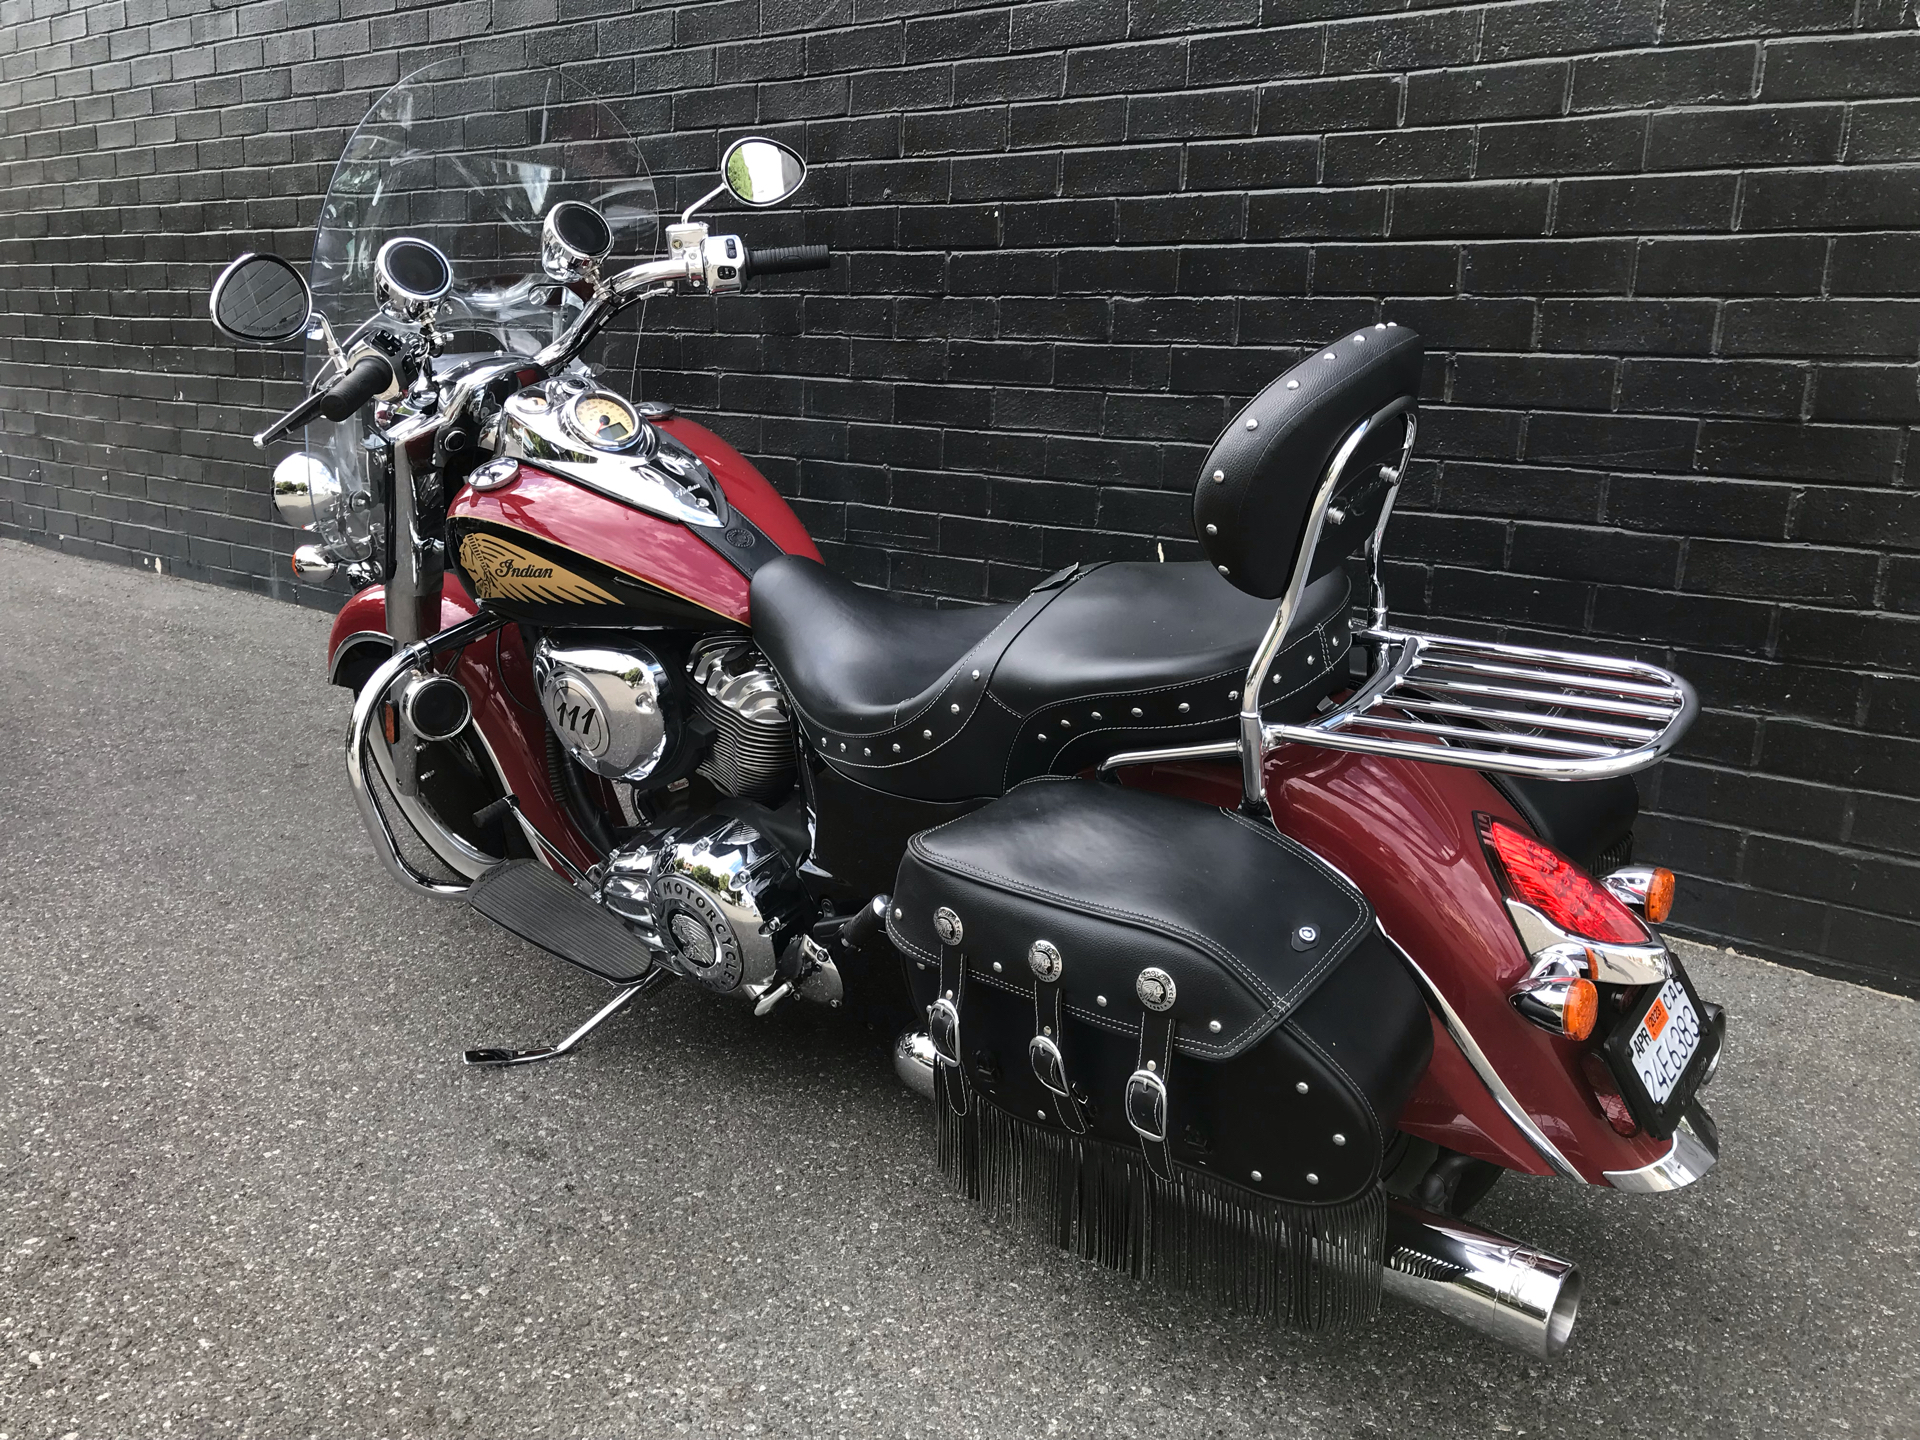 2019 Indian Chief® Vintage ABS in San Jose, California - Photo 6